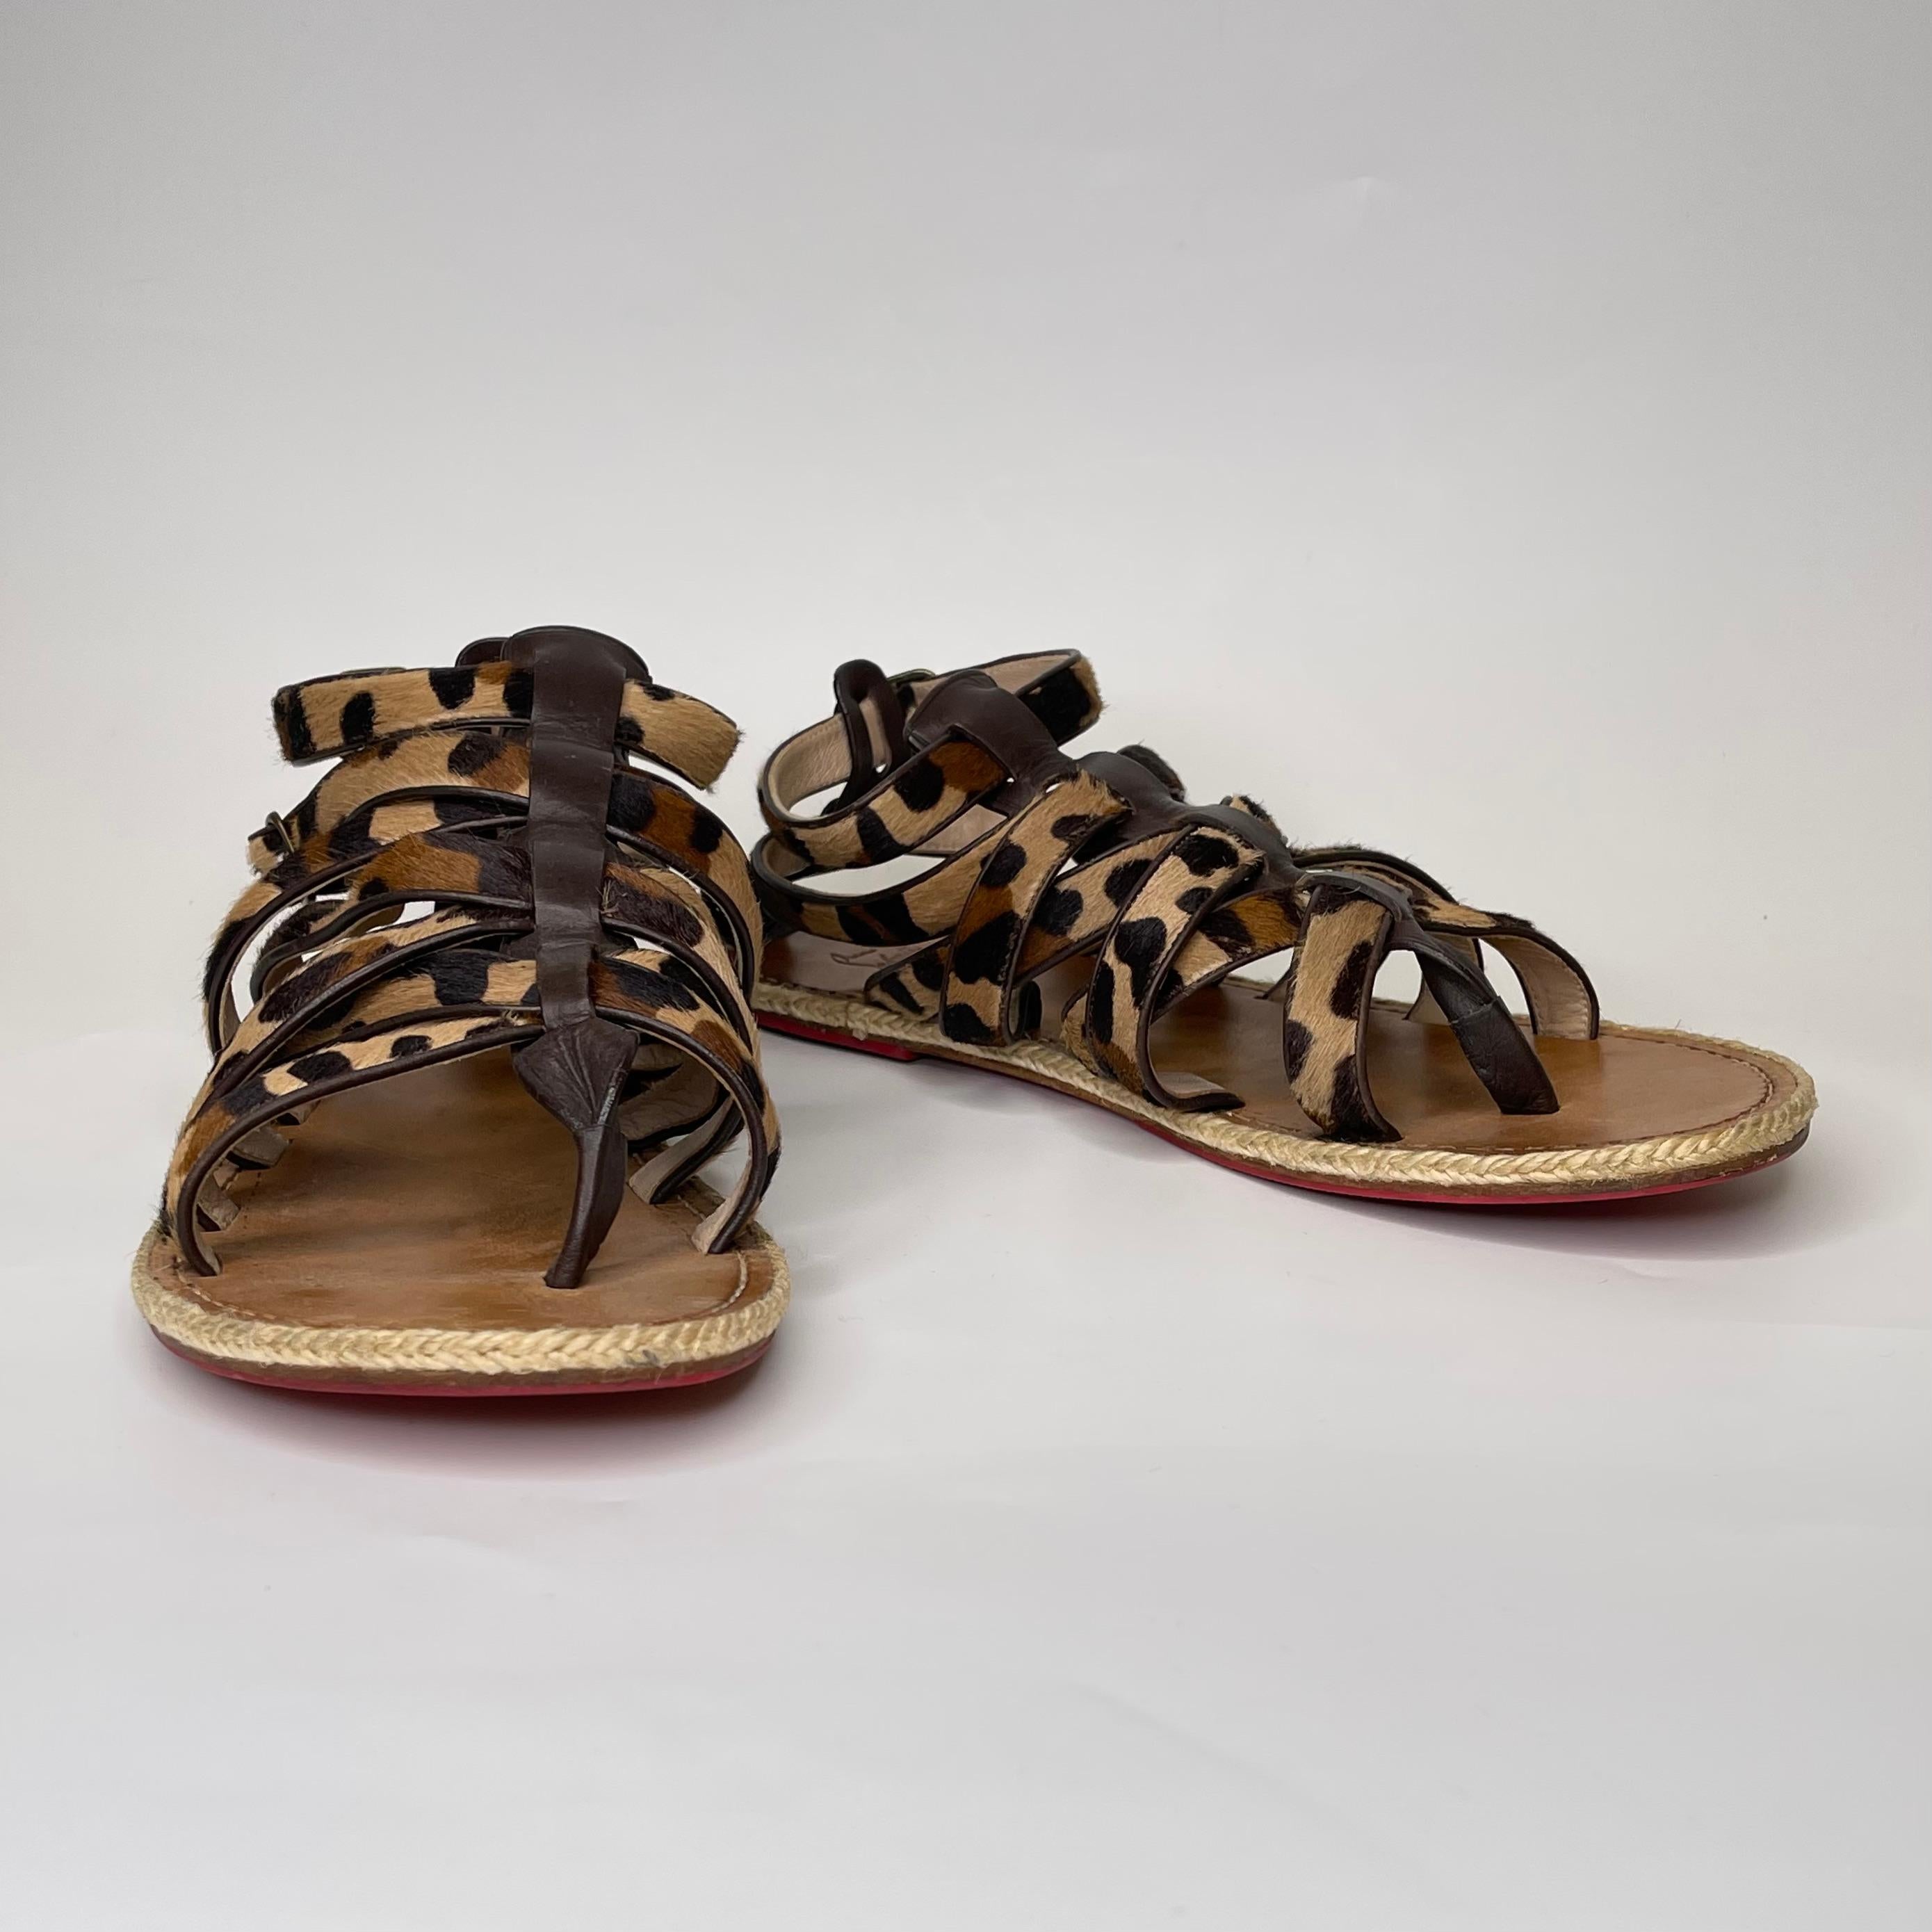 COLOR\MATERIAL: Brown leopard print pony hair and brown leather
SIZE: 44 EU / 11 US
COMES WITH: Box
CONDITION: Good - marks, stains, indentations to the bottoms. The shoe is stored in a box and stuffed, but some of the straps looks misinformed.